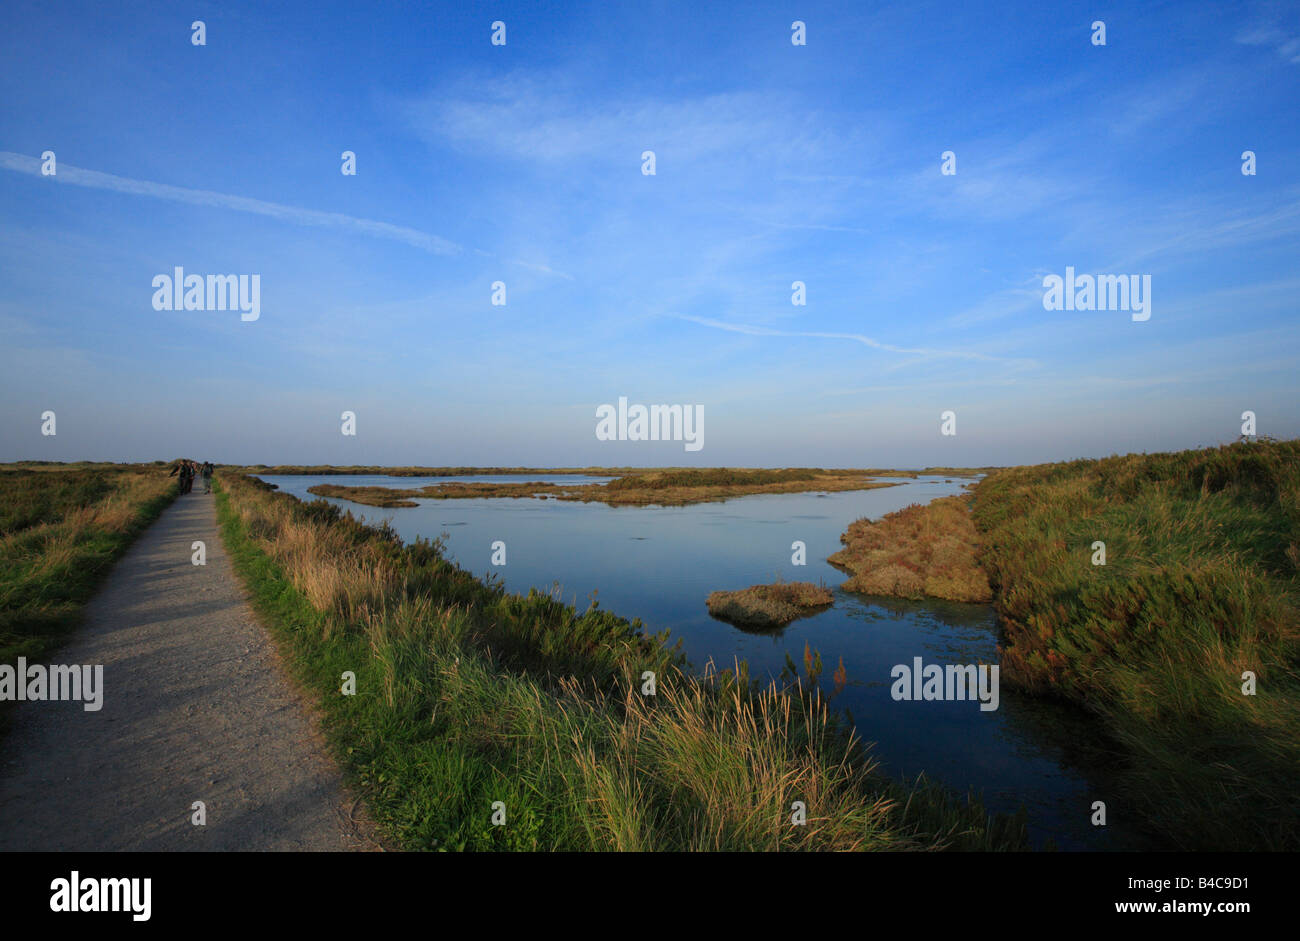 The RSPB nature reserve at Titchwell Marsh in Norfolk, England. Stock Photo